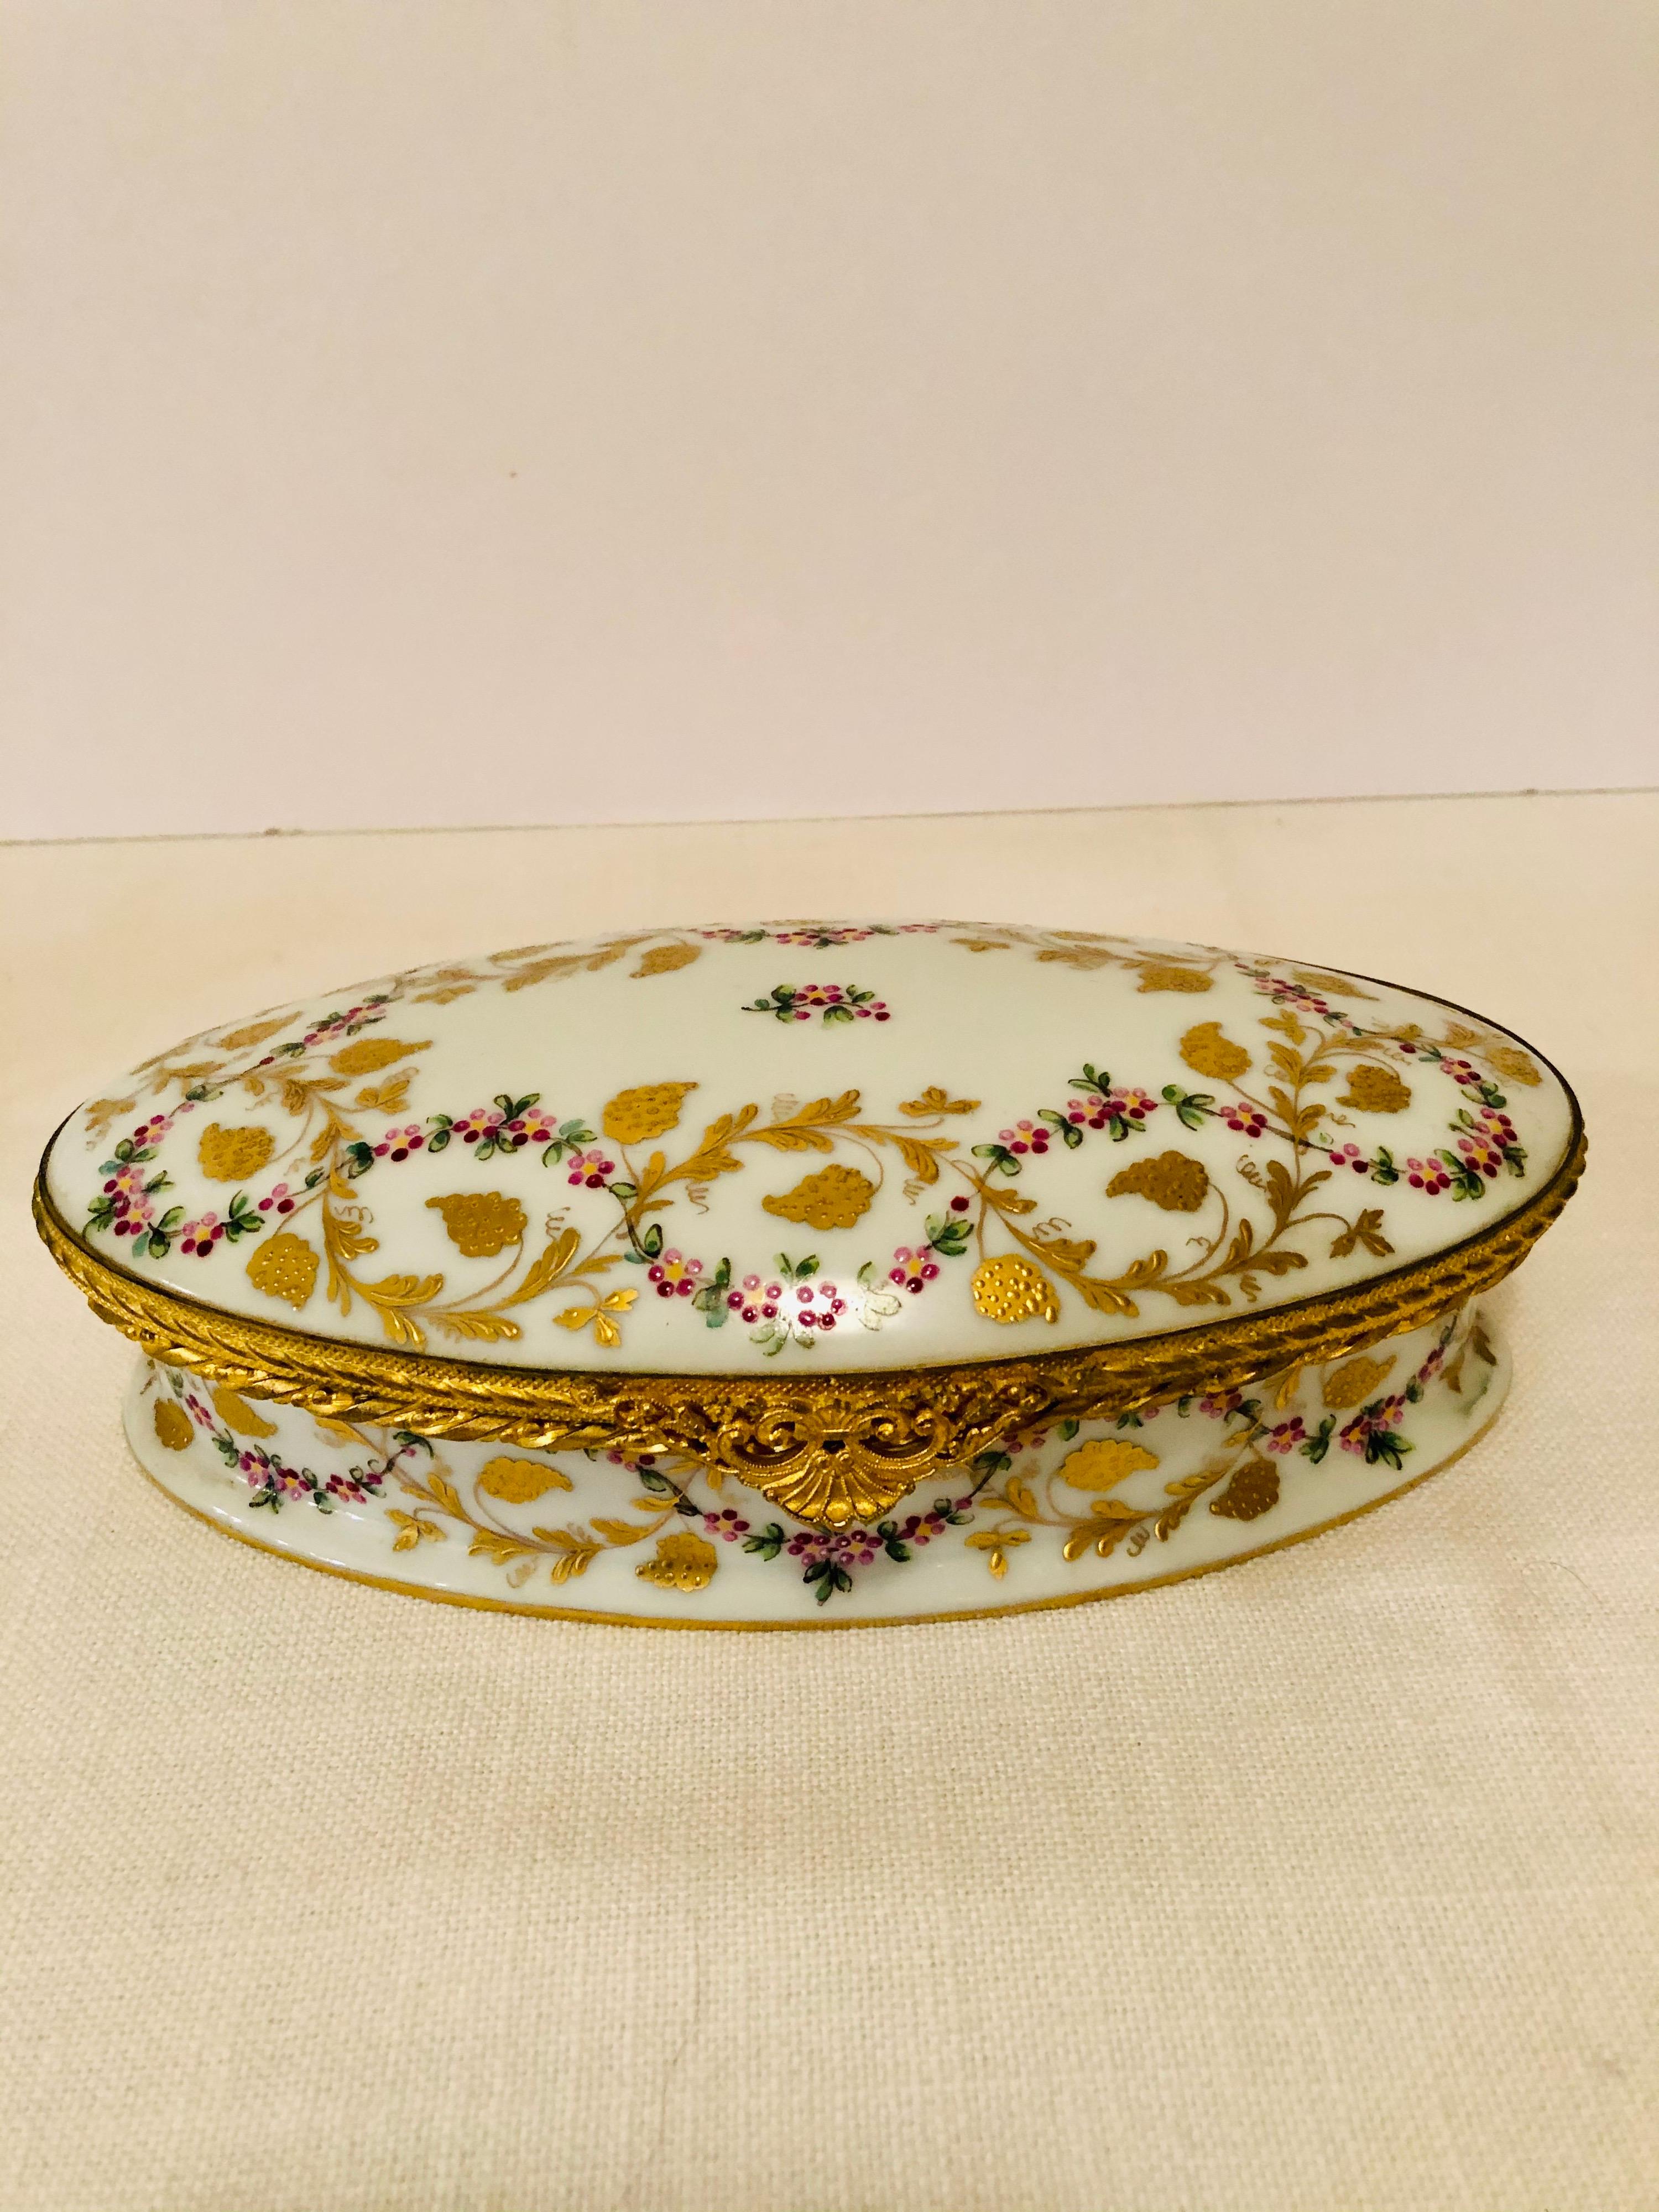 This is a beautiful Le Tallec oval box. It has raised gilding of leaves and raspberries, and a raised enamel ribbon decoration of flowers. Scroll through the pictures to see the exquisite artwork on this Le Tallec box. You can see that the hinge of